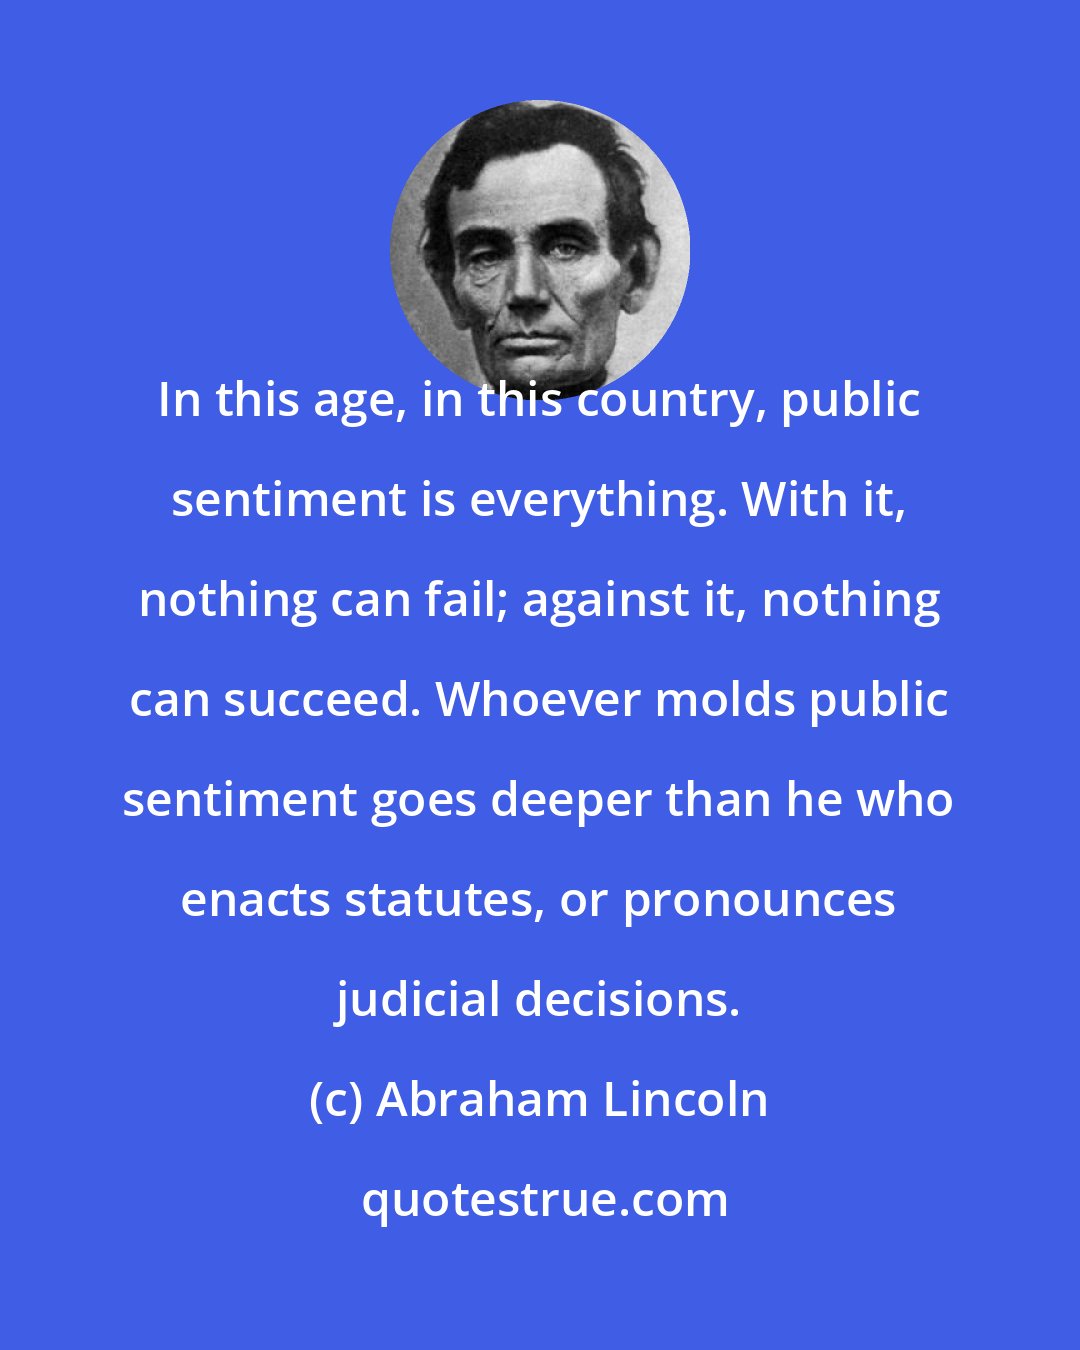 Abraham Lincoln: In this age, in this country, public sentiment is everything. With it, nothing can fail; against it, nothing can succeed. Whoever molds public sentiment goes deeper than he who enacts statutes, or pronounces judicial decisions.